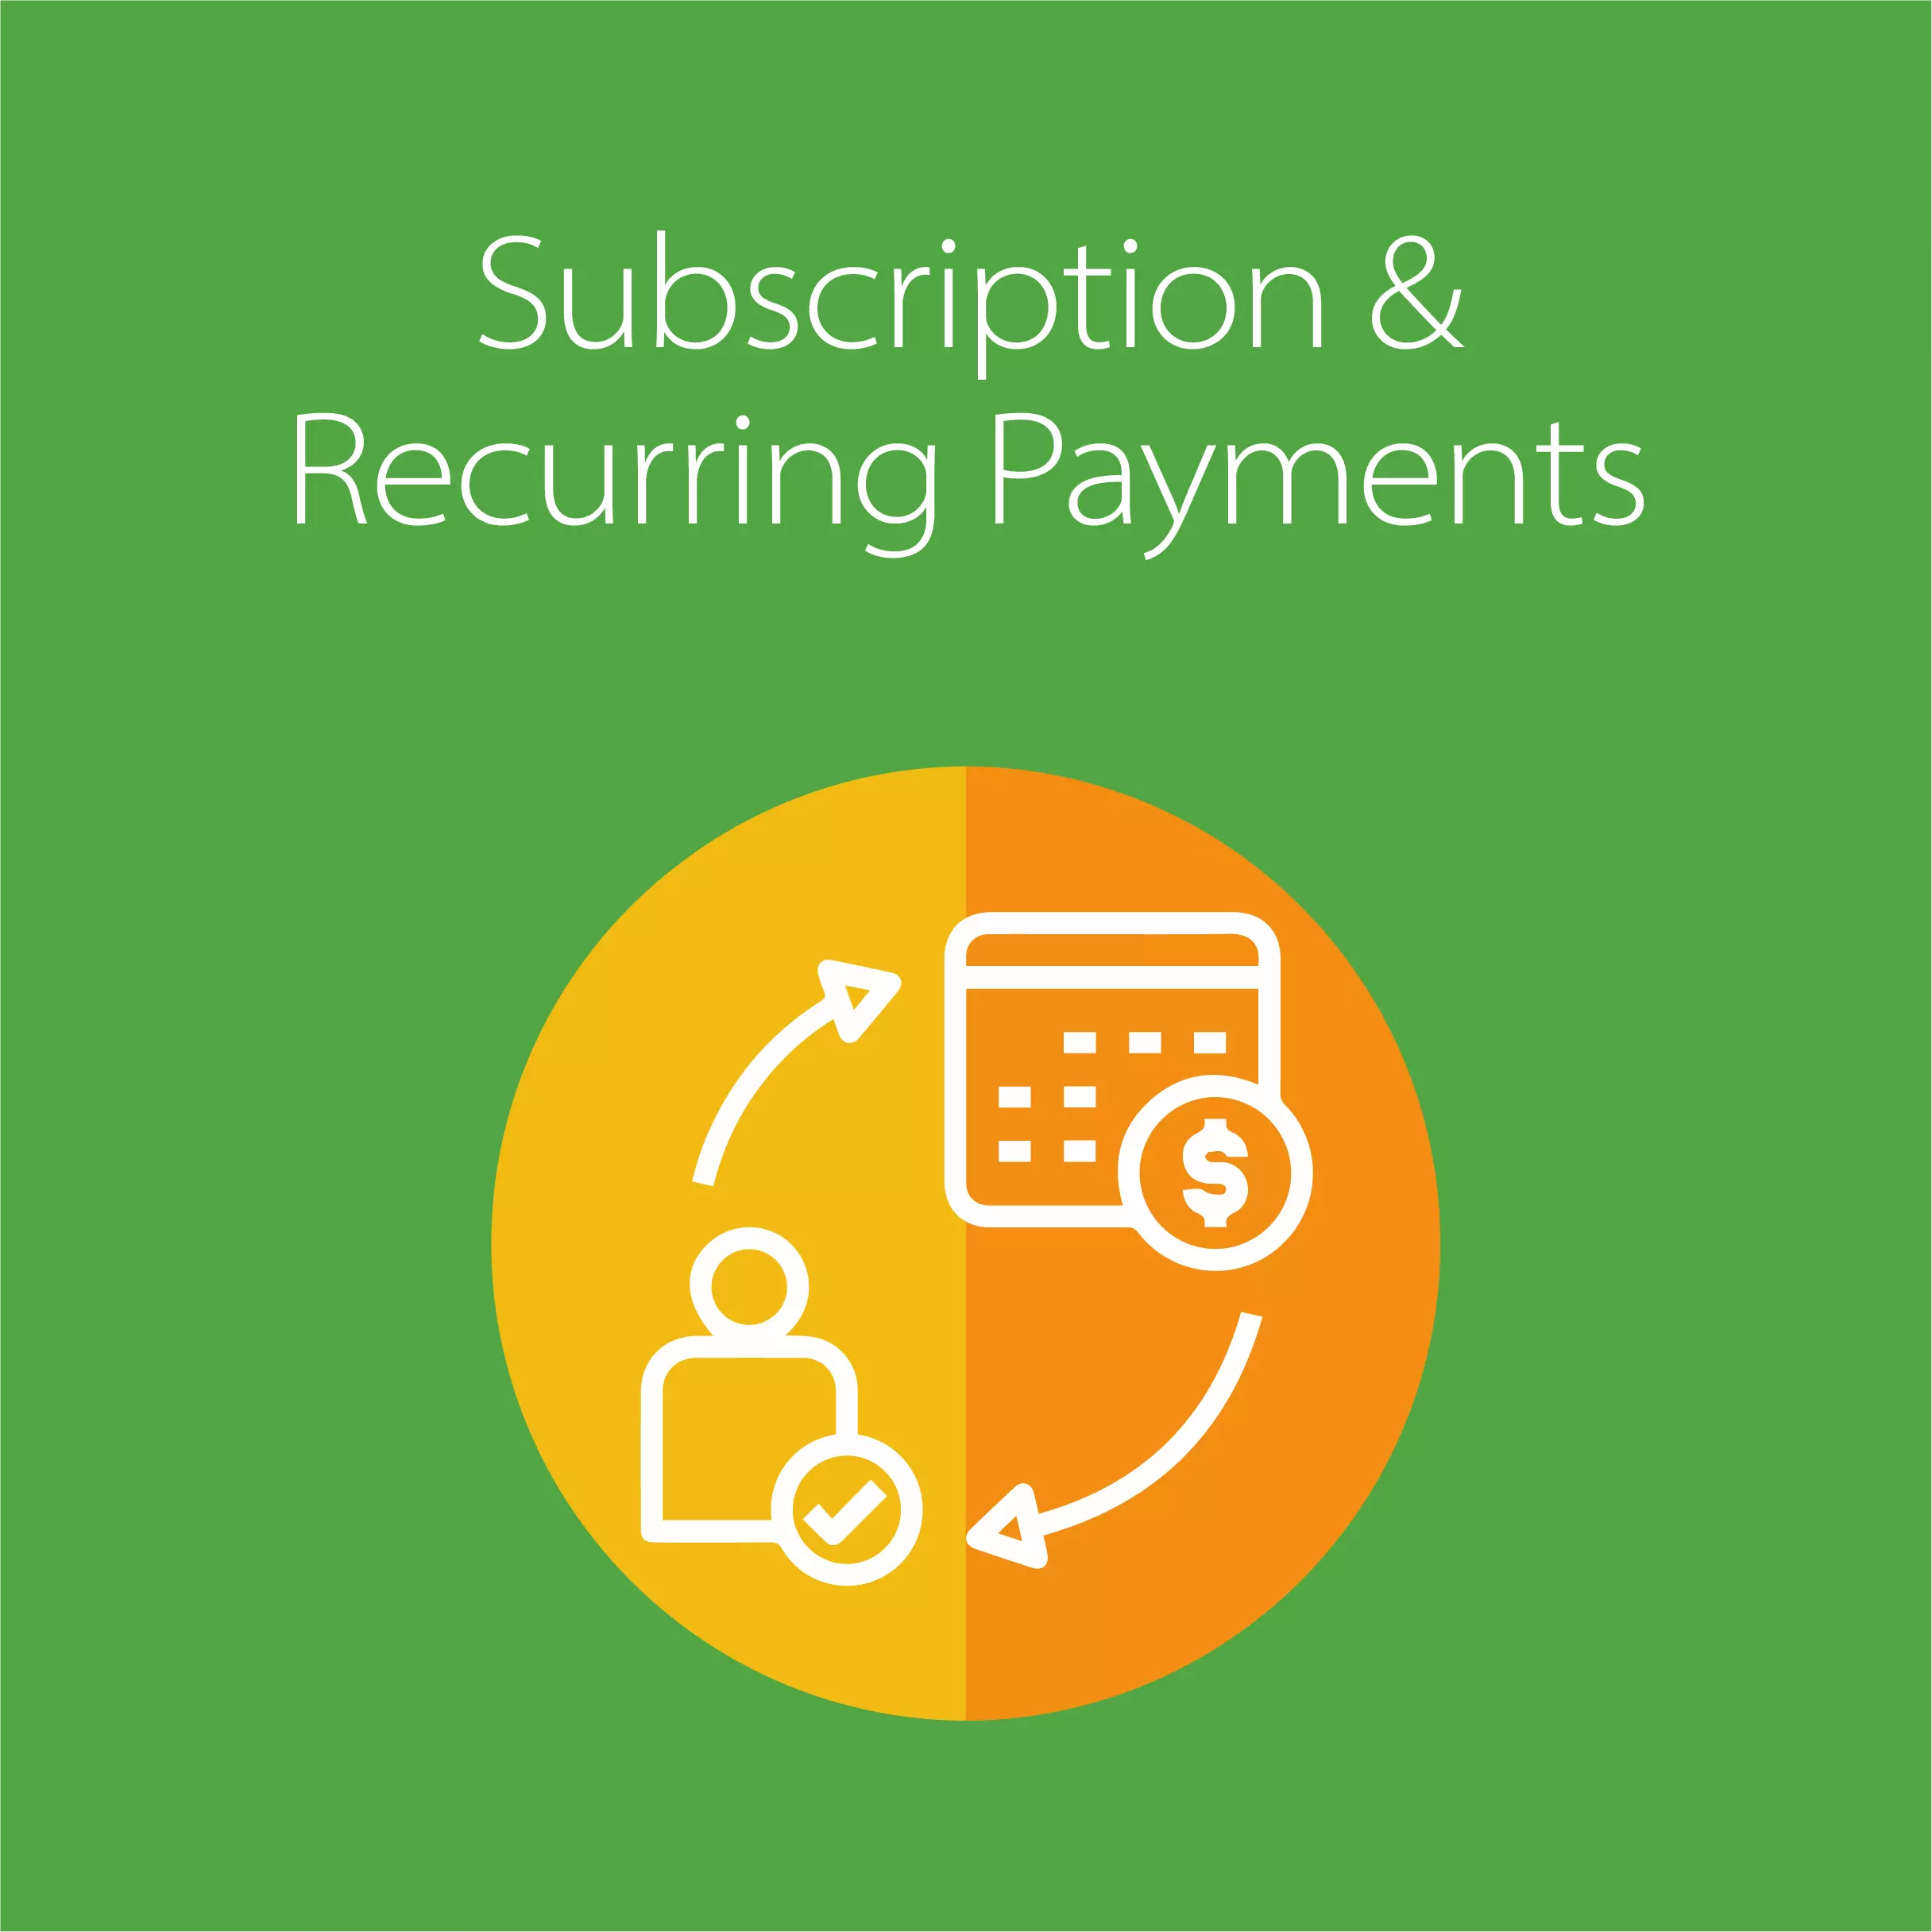 Subscription & Recurring Payments